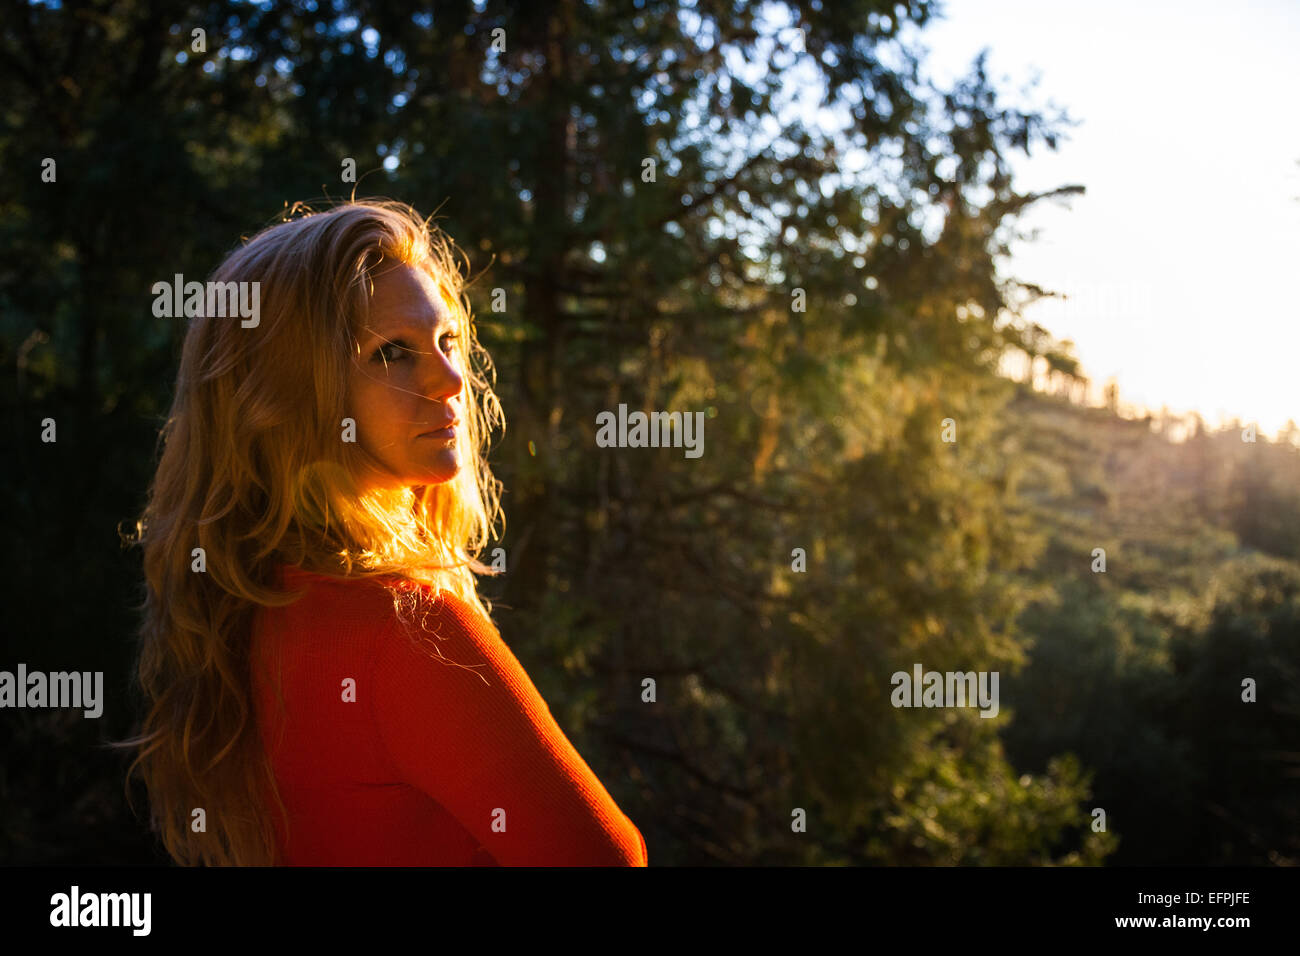 Mid adult woman looking over her shoulder in mountain forest at sunset, Palomar, California, USA Stock Photo